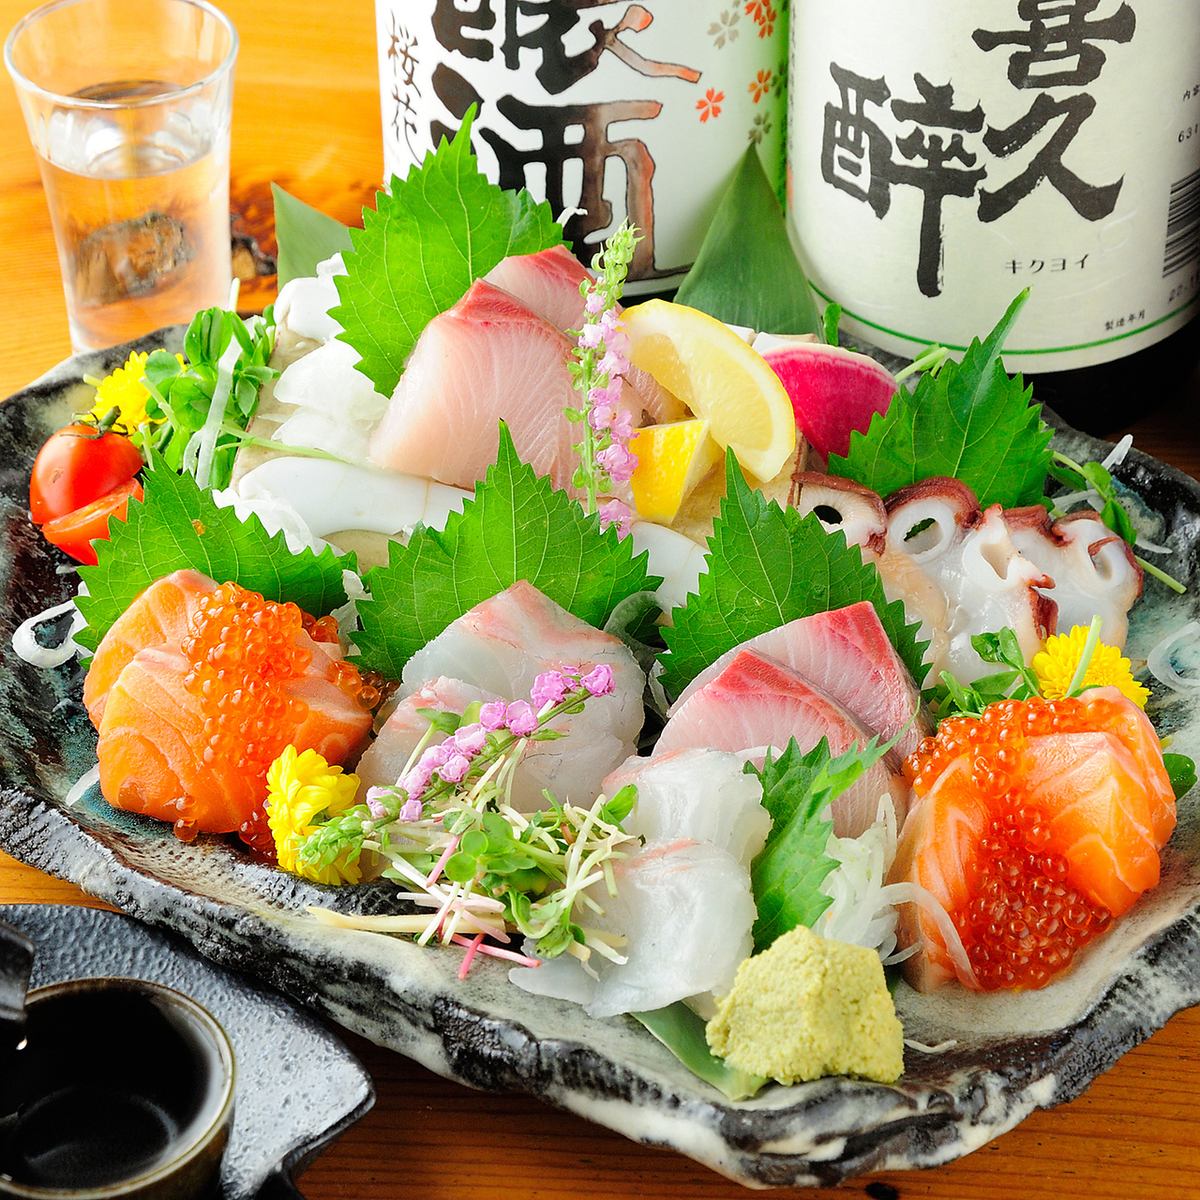 Fish and vegetables also vary depending on the season...Enjoy the flavors of the four seasons★